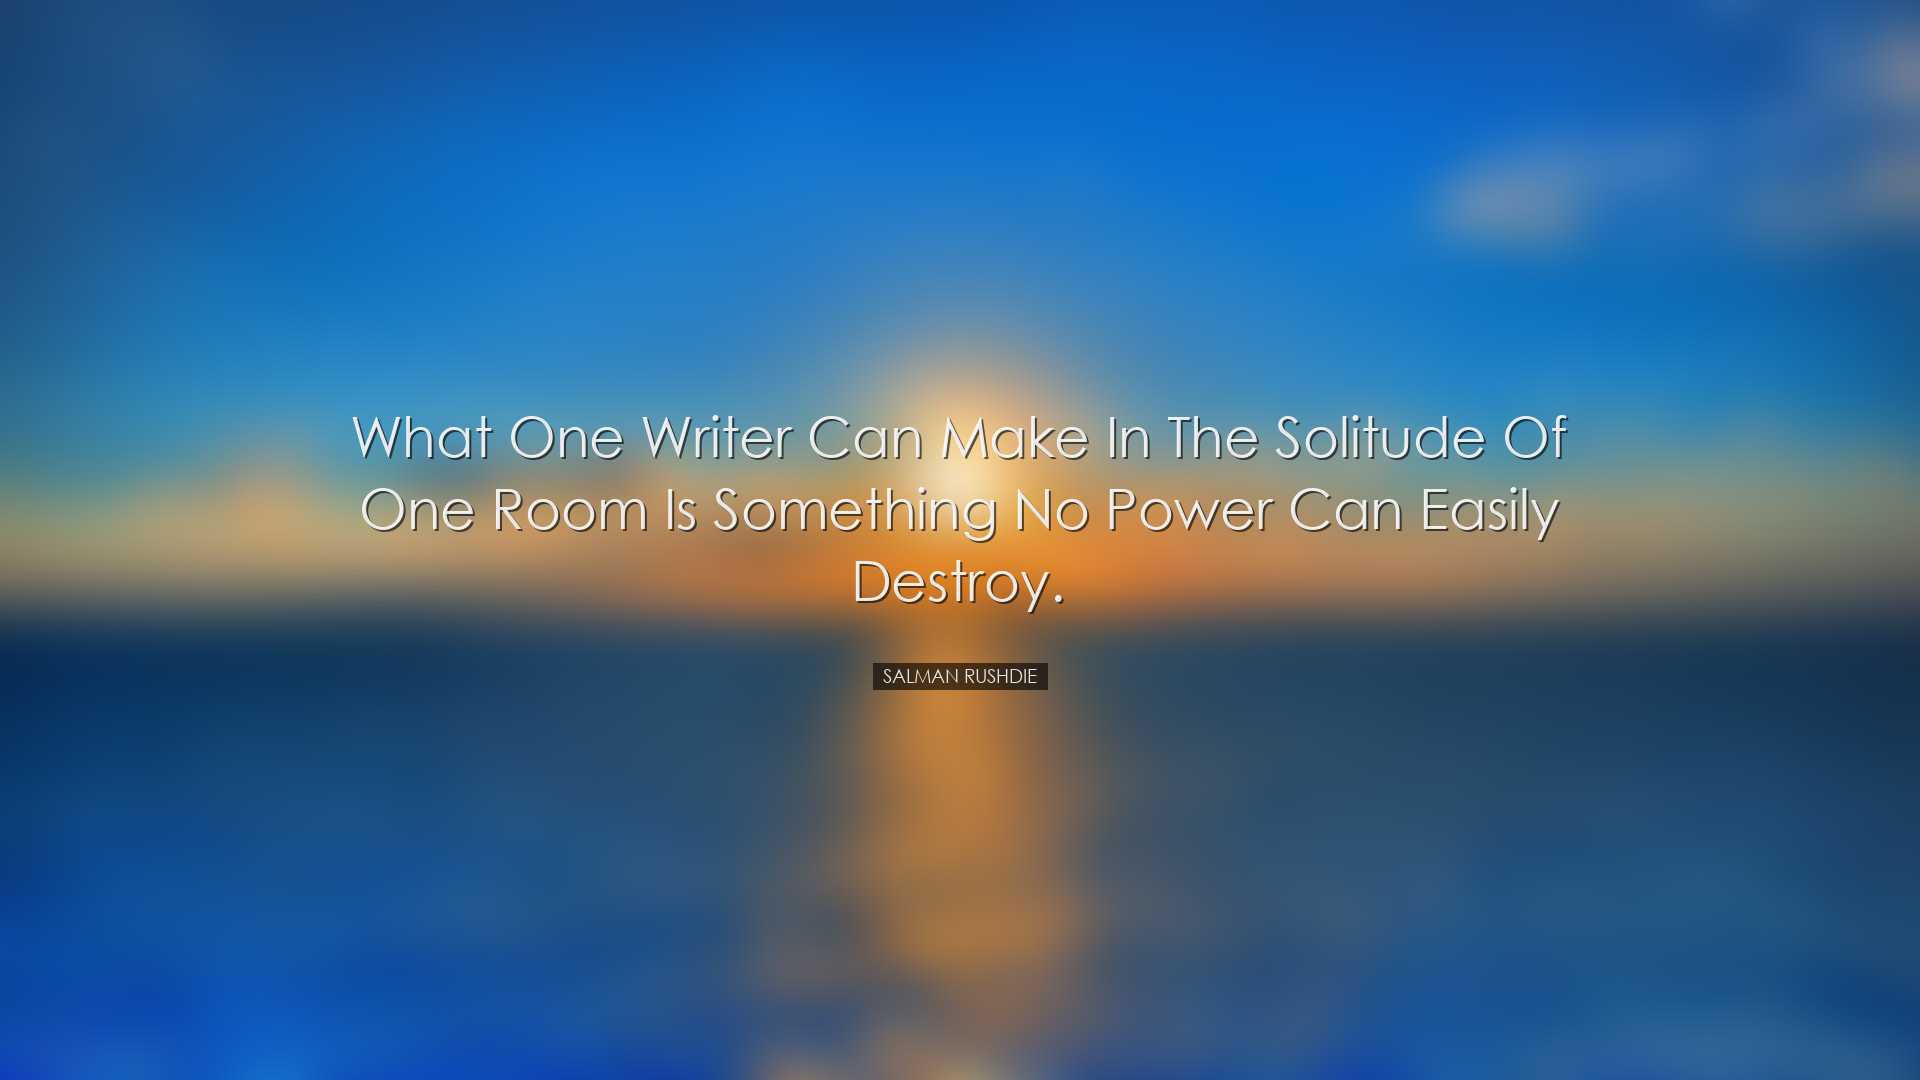 What one writer can make in the solitude of one room is something